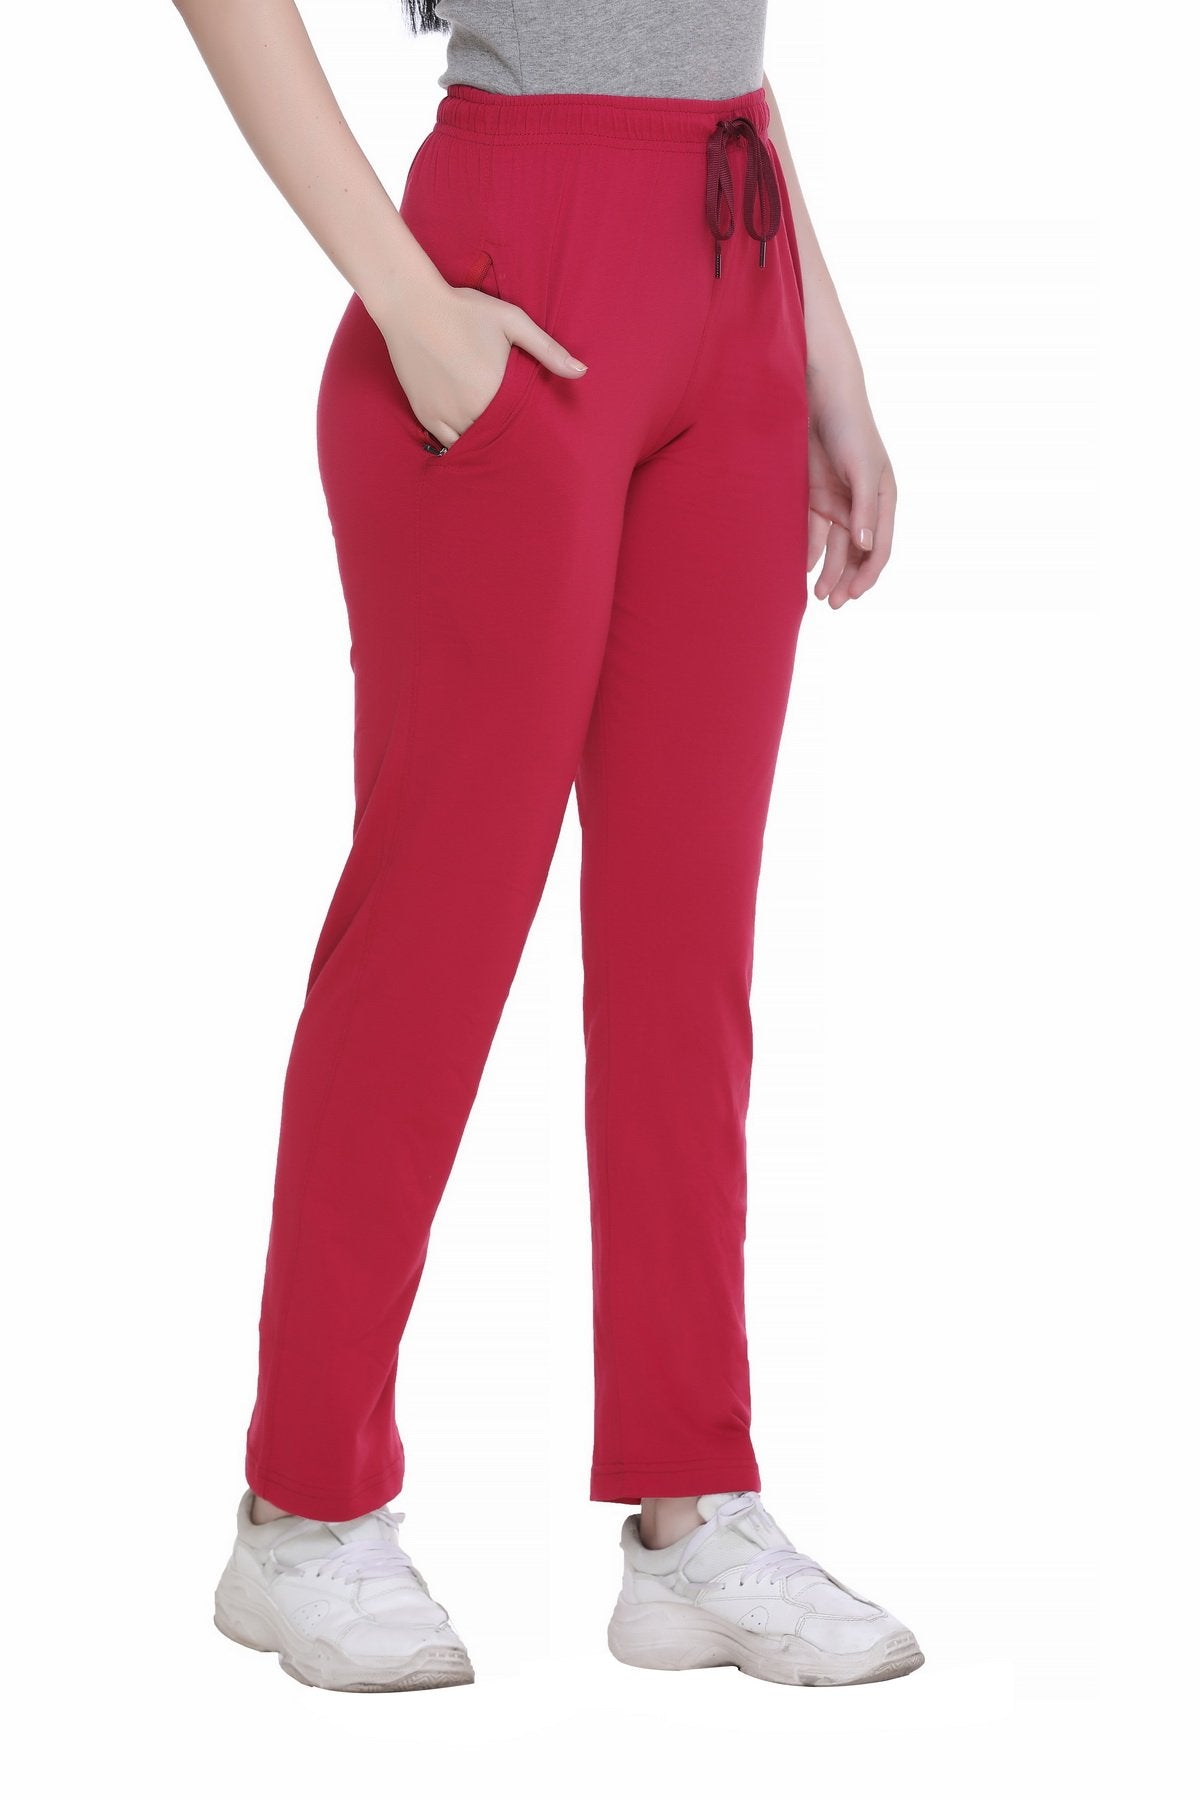 Daily Wear Comfortable And Easily Washable Golden Color Girls Pants Length:  33 Inch (in) at Best Price in Osmanabad | Maitrin Ladies Boutiques